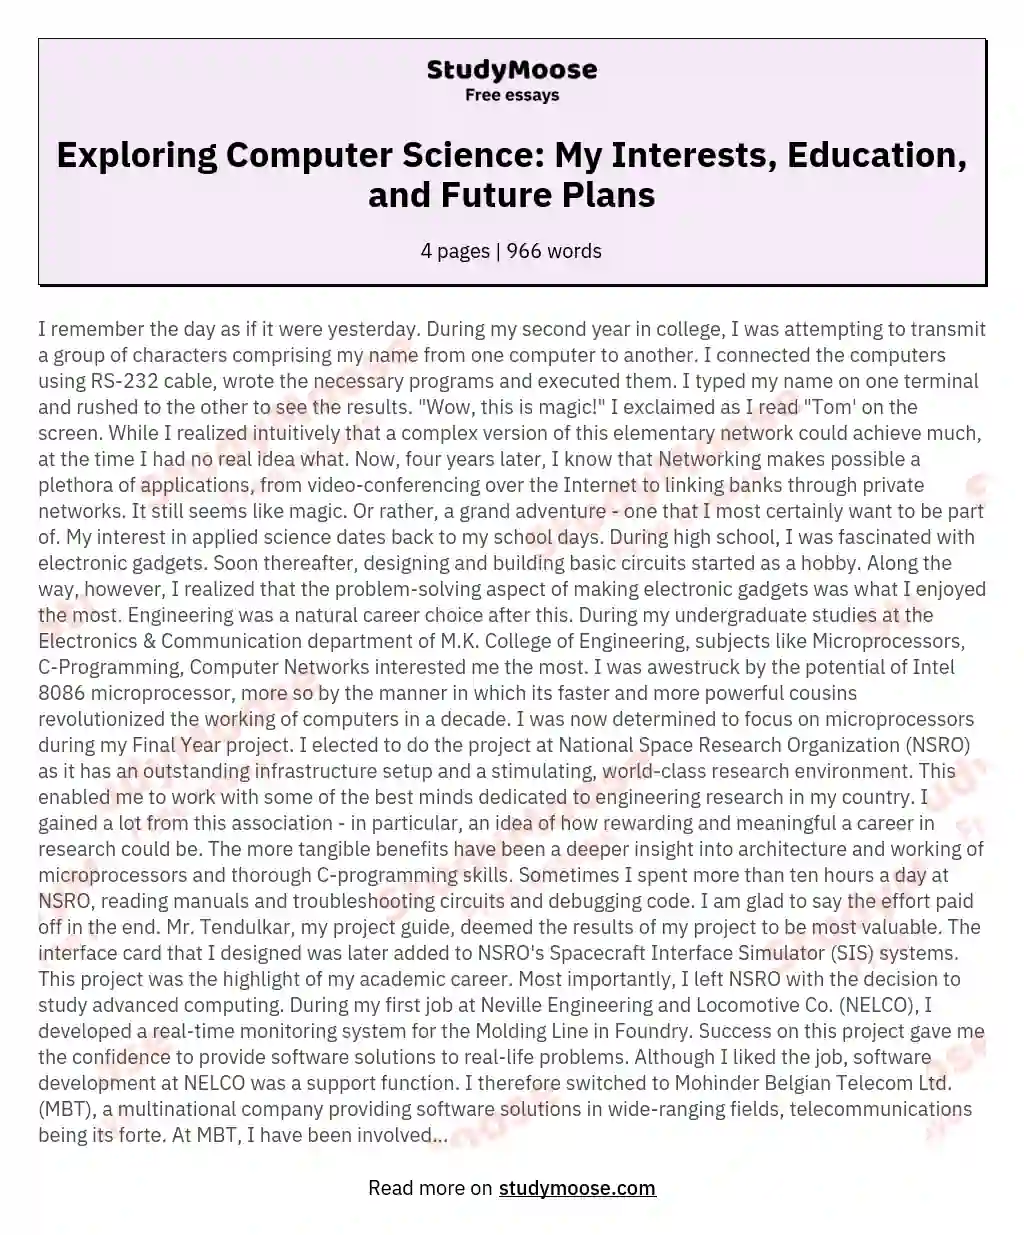 A Personal Account of the Interest, Education, and Future Plans in the Field of Computer Science